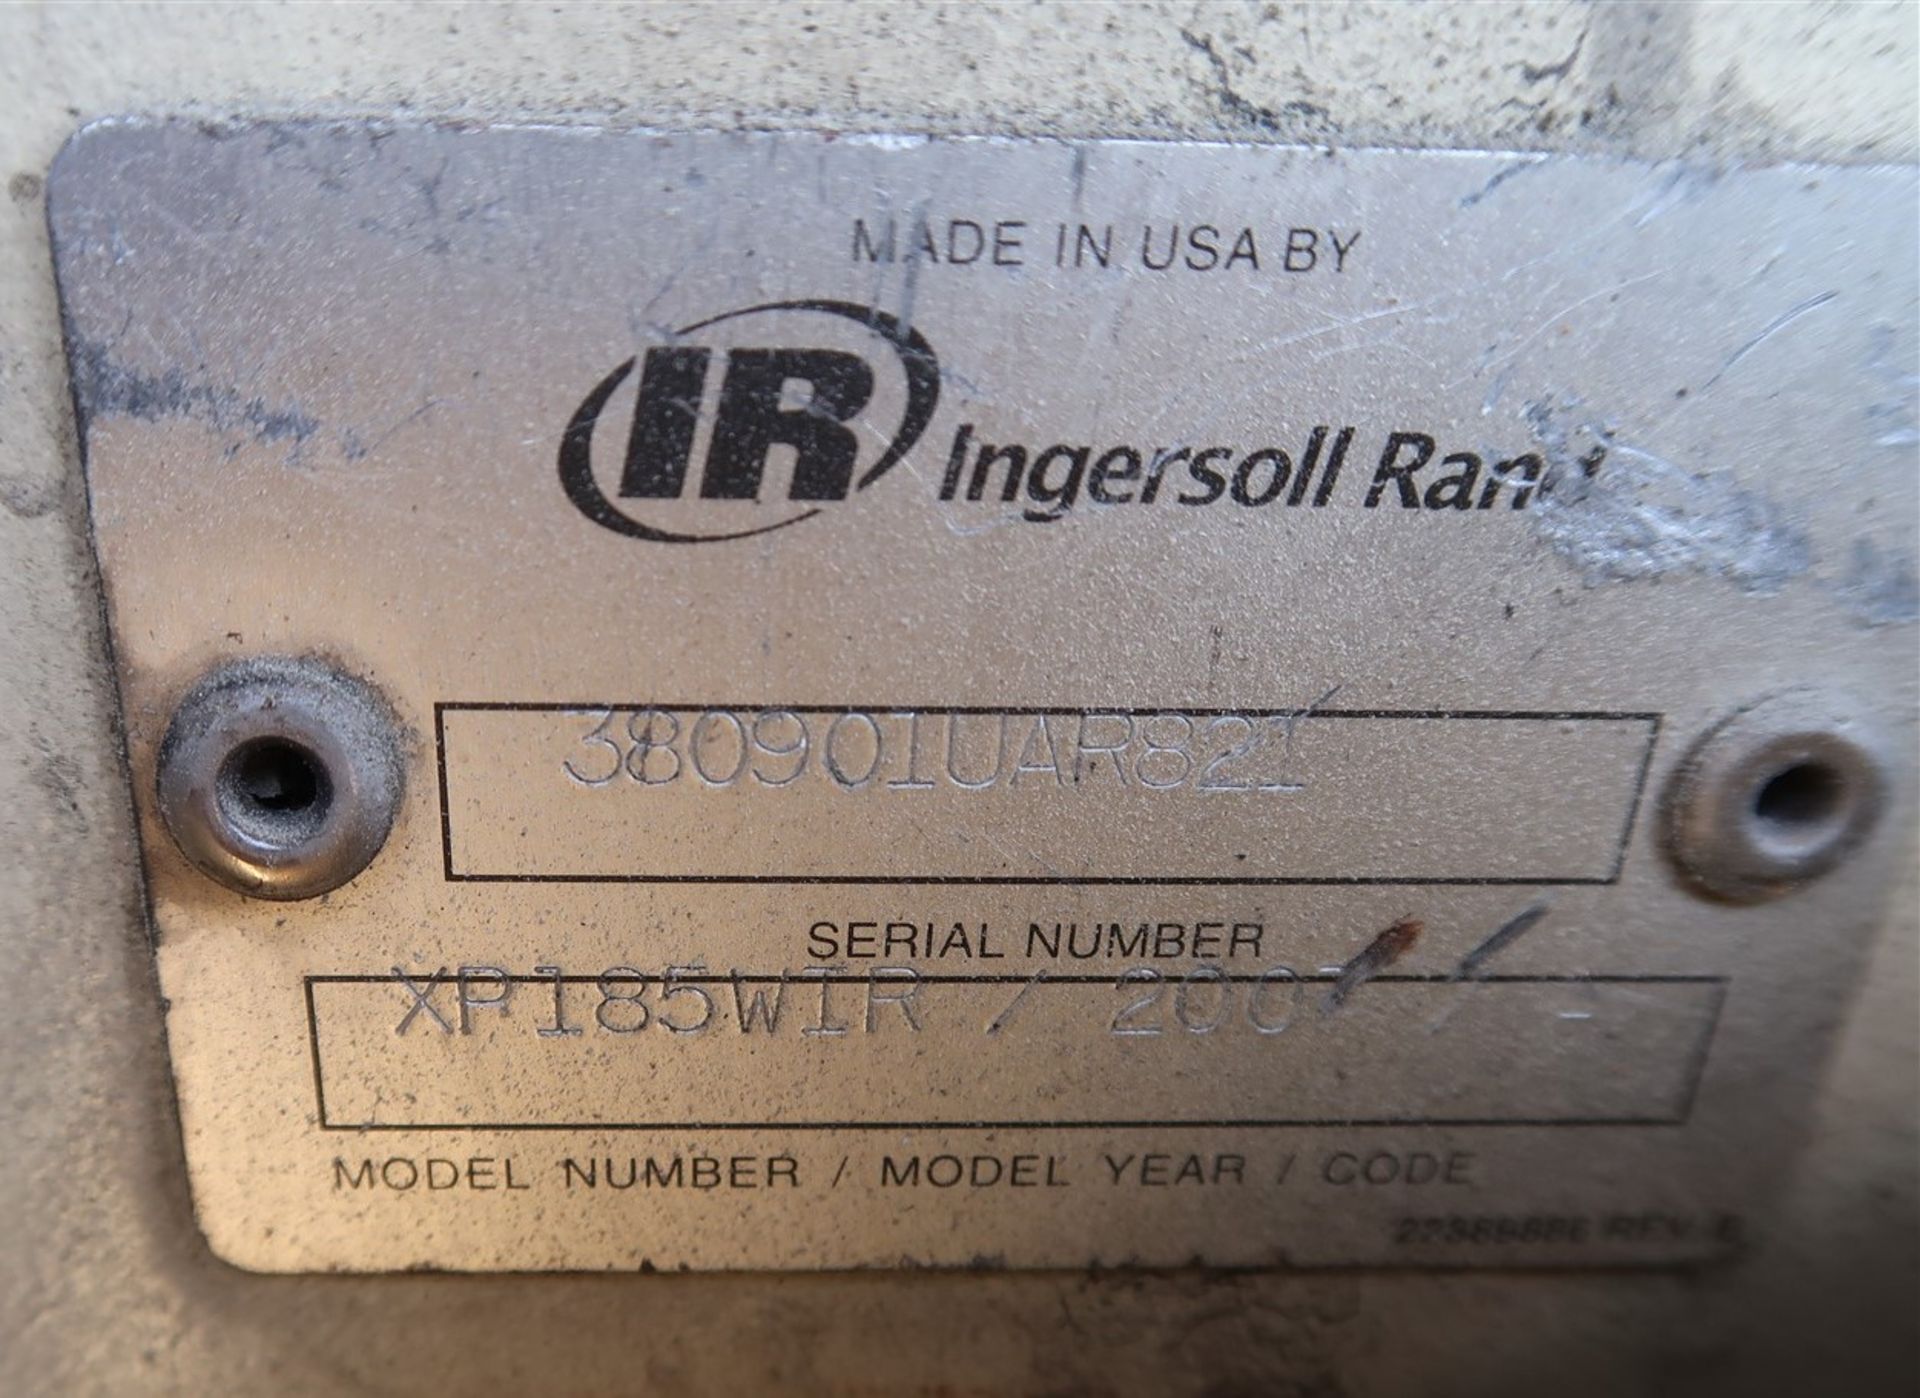 INGERSOLL RAND PORTABLE COMPRESSOR, MOD. XP185, 3711 HOURS - Image 7 of 7